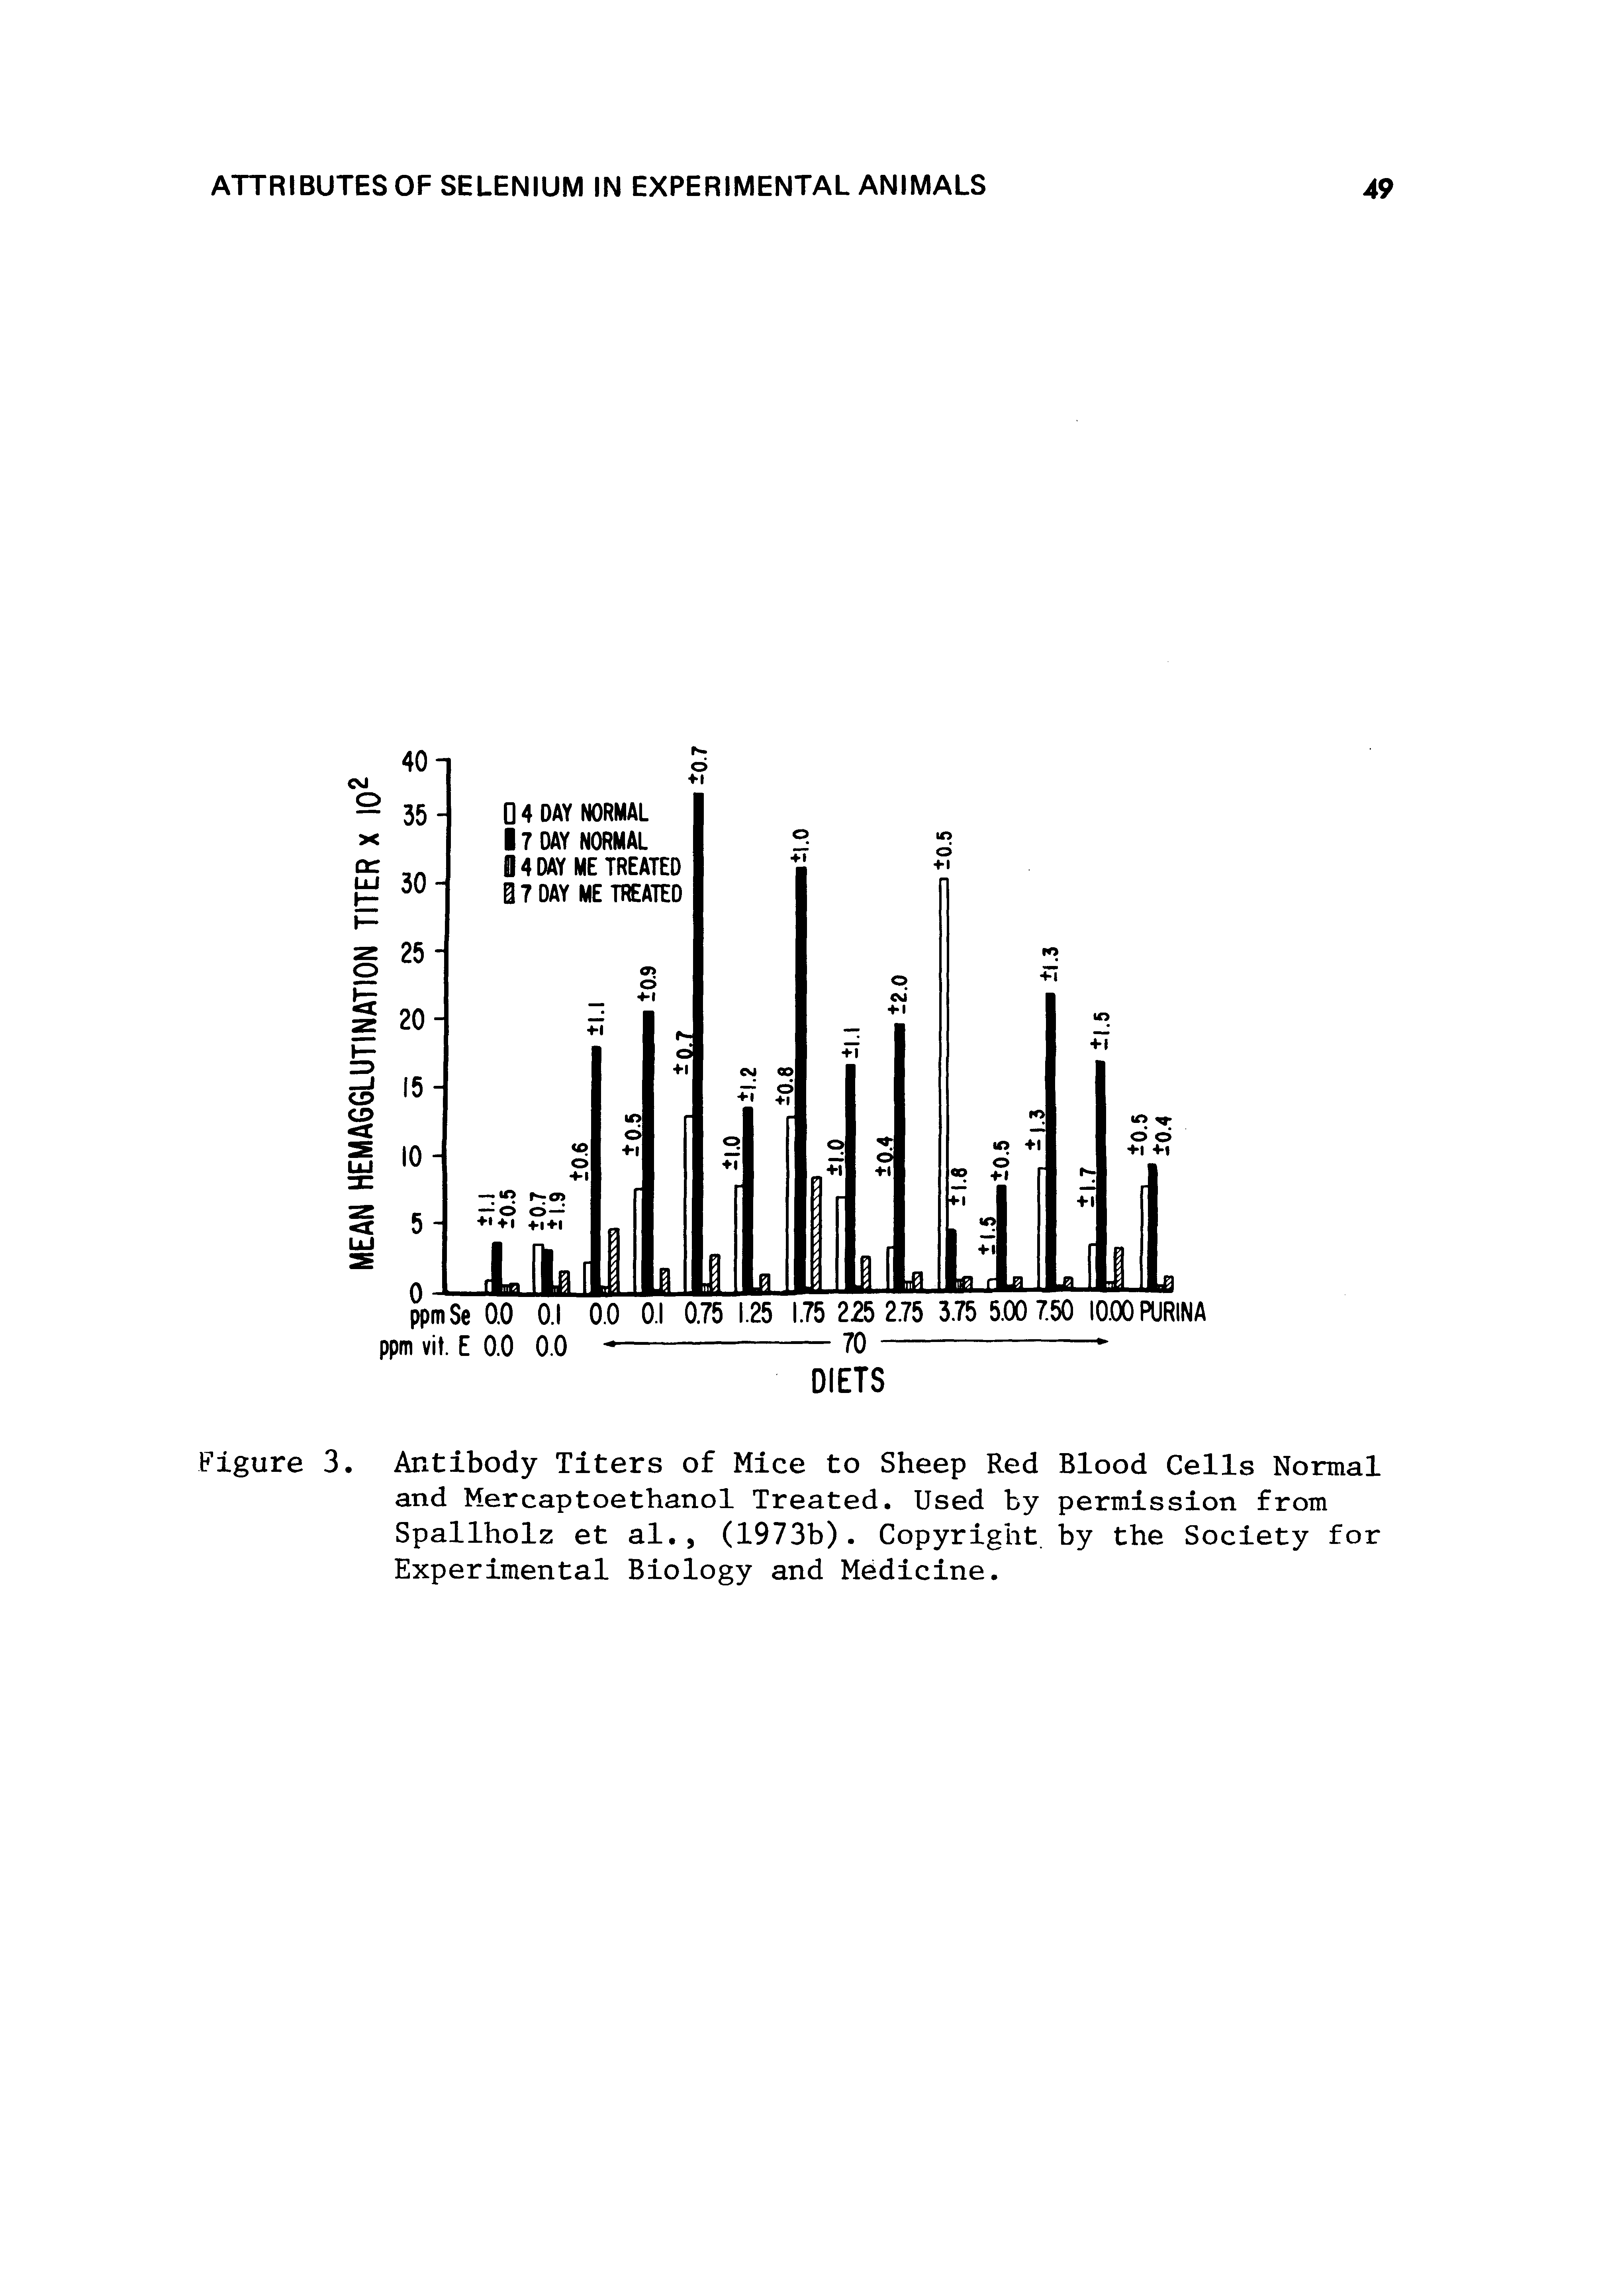 Figure 3. Antibody Titers of Mice to Sheep Red Blood Cells Normal and Mercaptoethanol Treated. Used by permission from Spallholz et al., (1973b). Copyright, by the Society for Experimental Biology and Medicine.